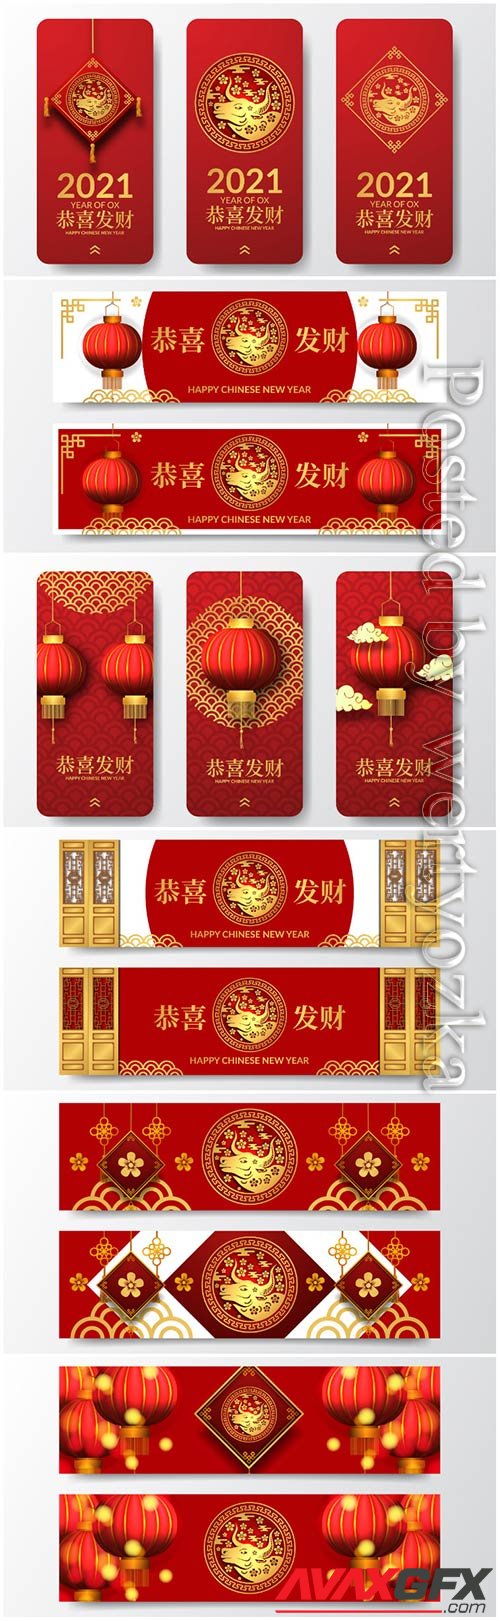 Happy chinese new year 2021 vector illustrations